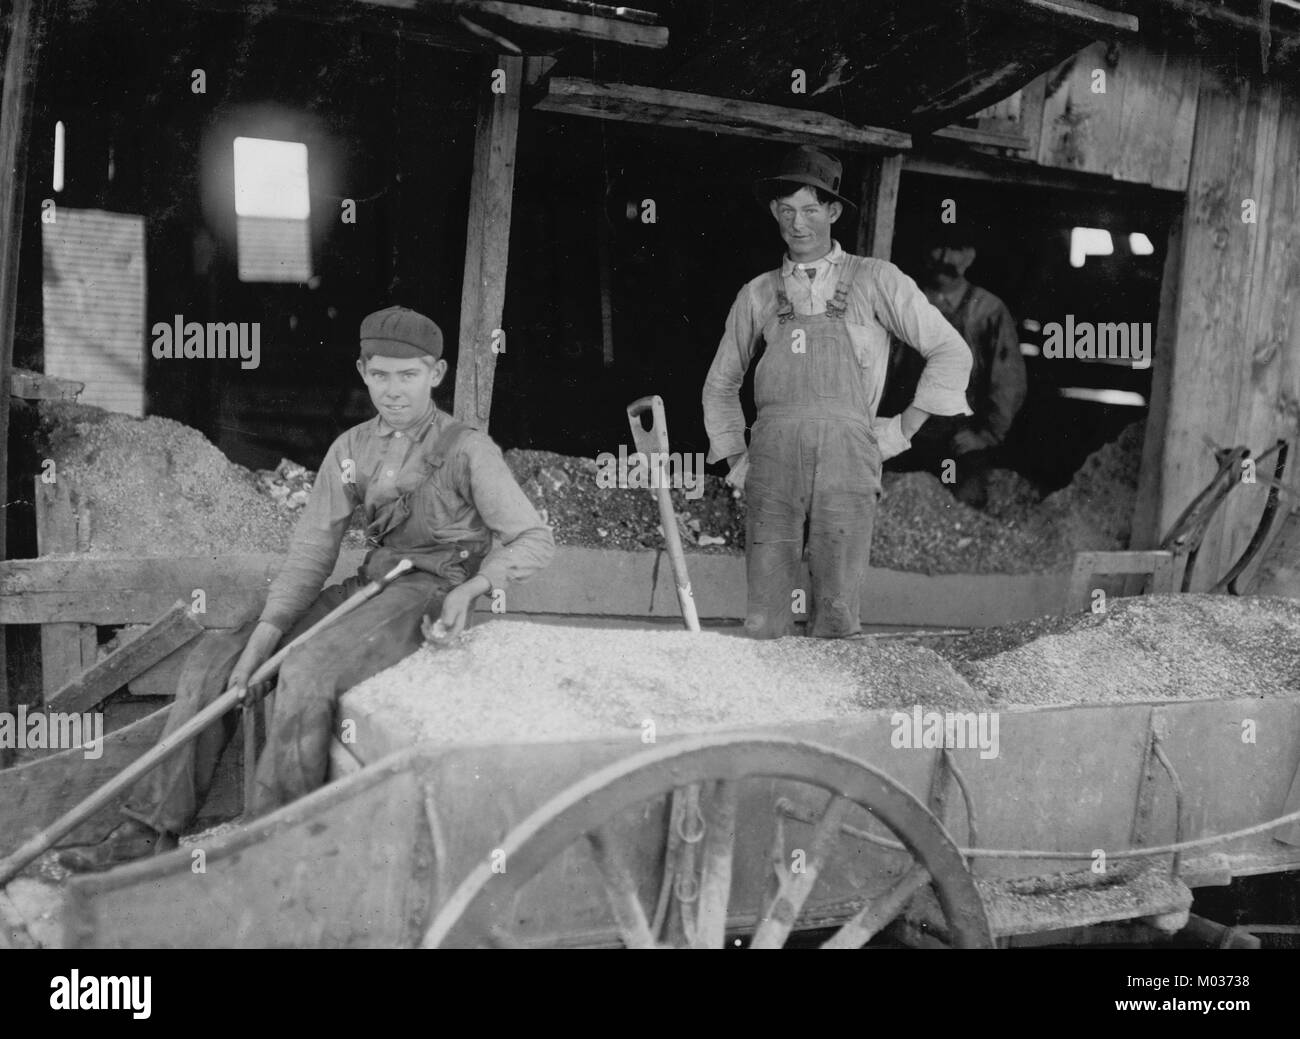 14 year old boy at Heavy Work. Shoveling Ore at Daisy Bell Mine, Aurora, Stock Photo